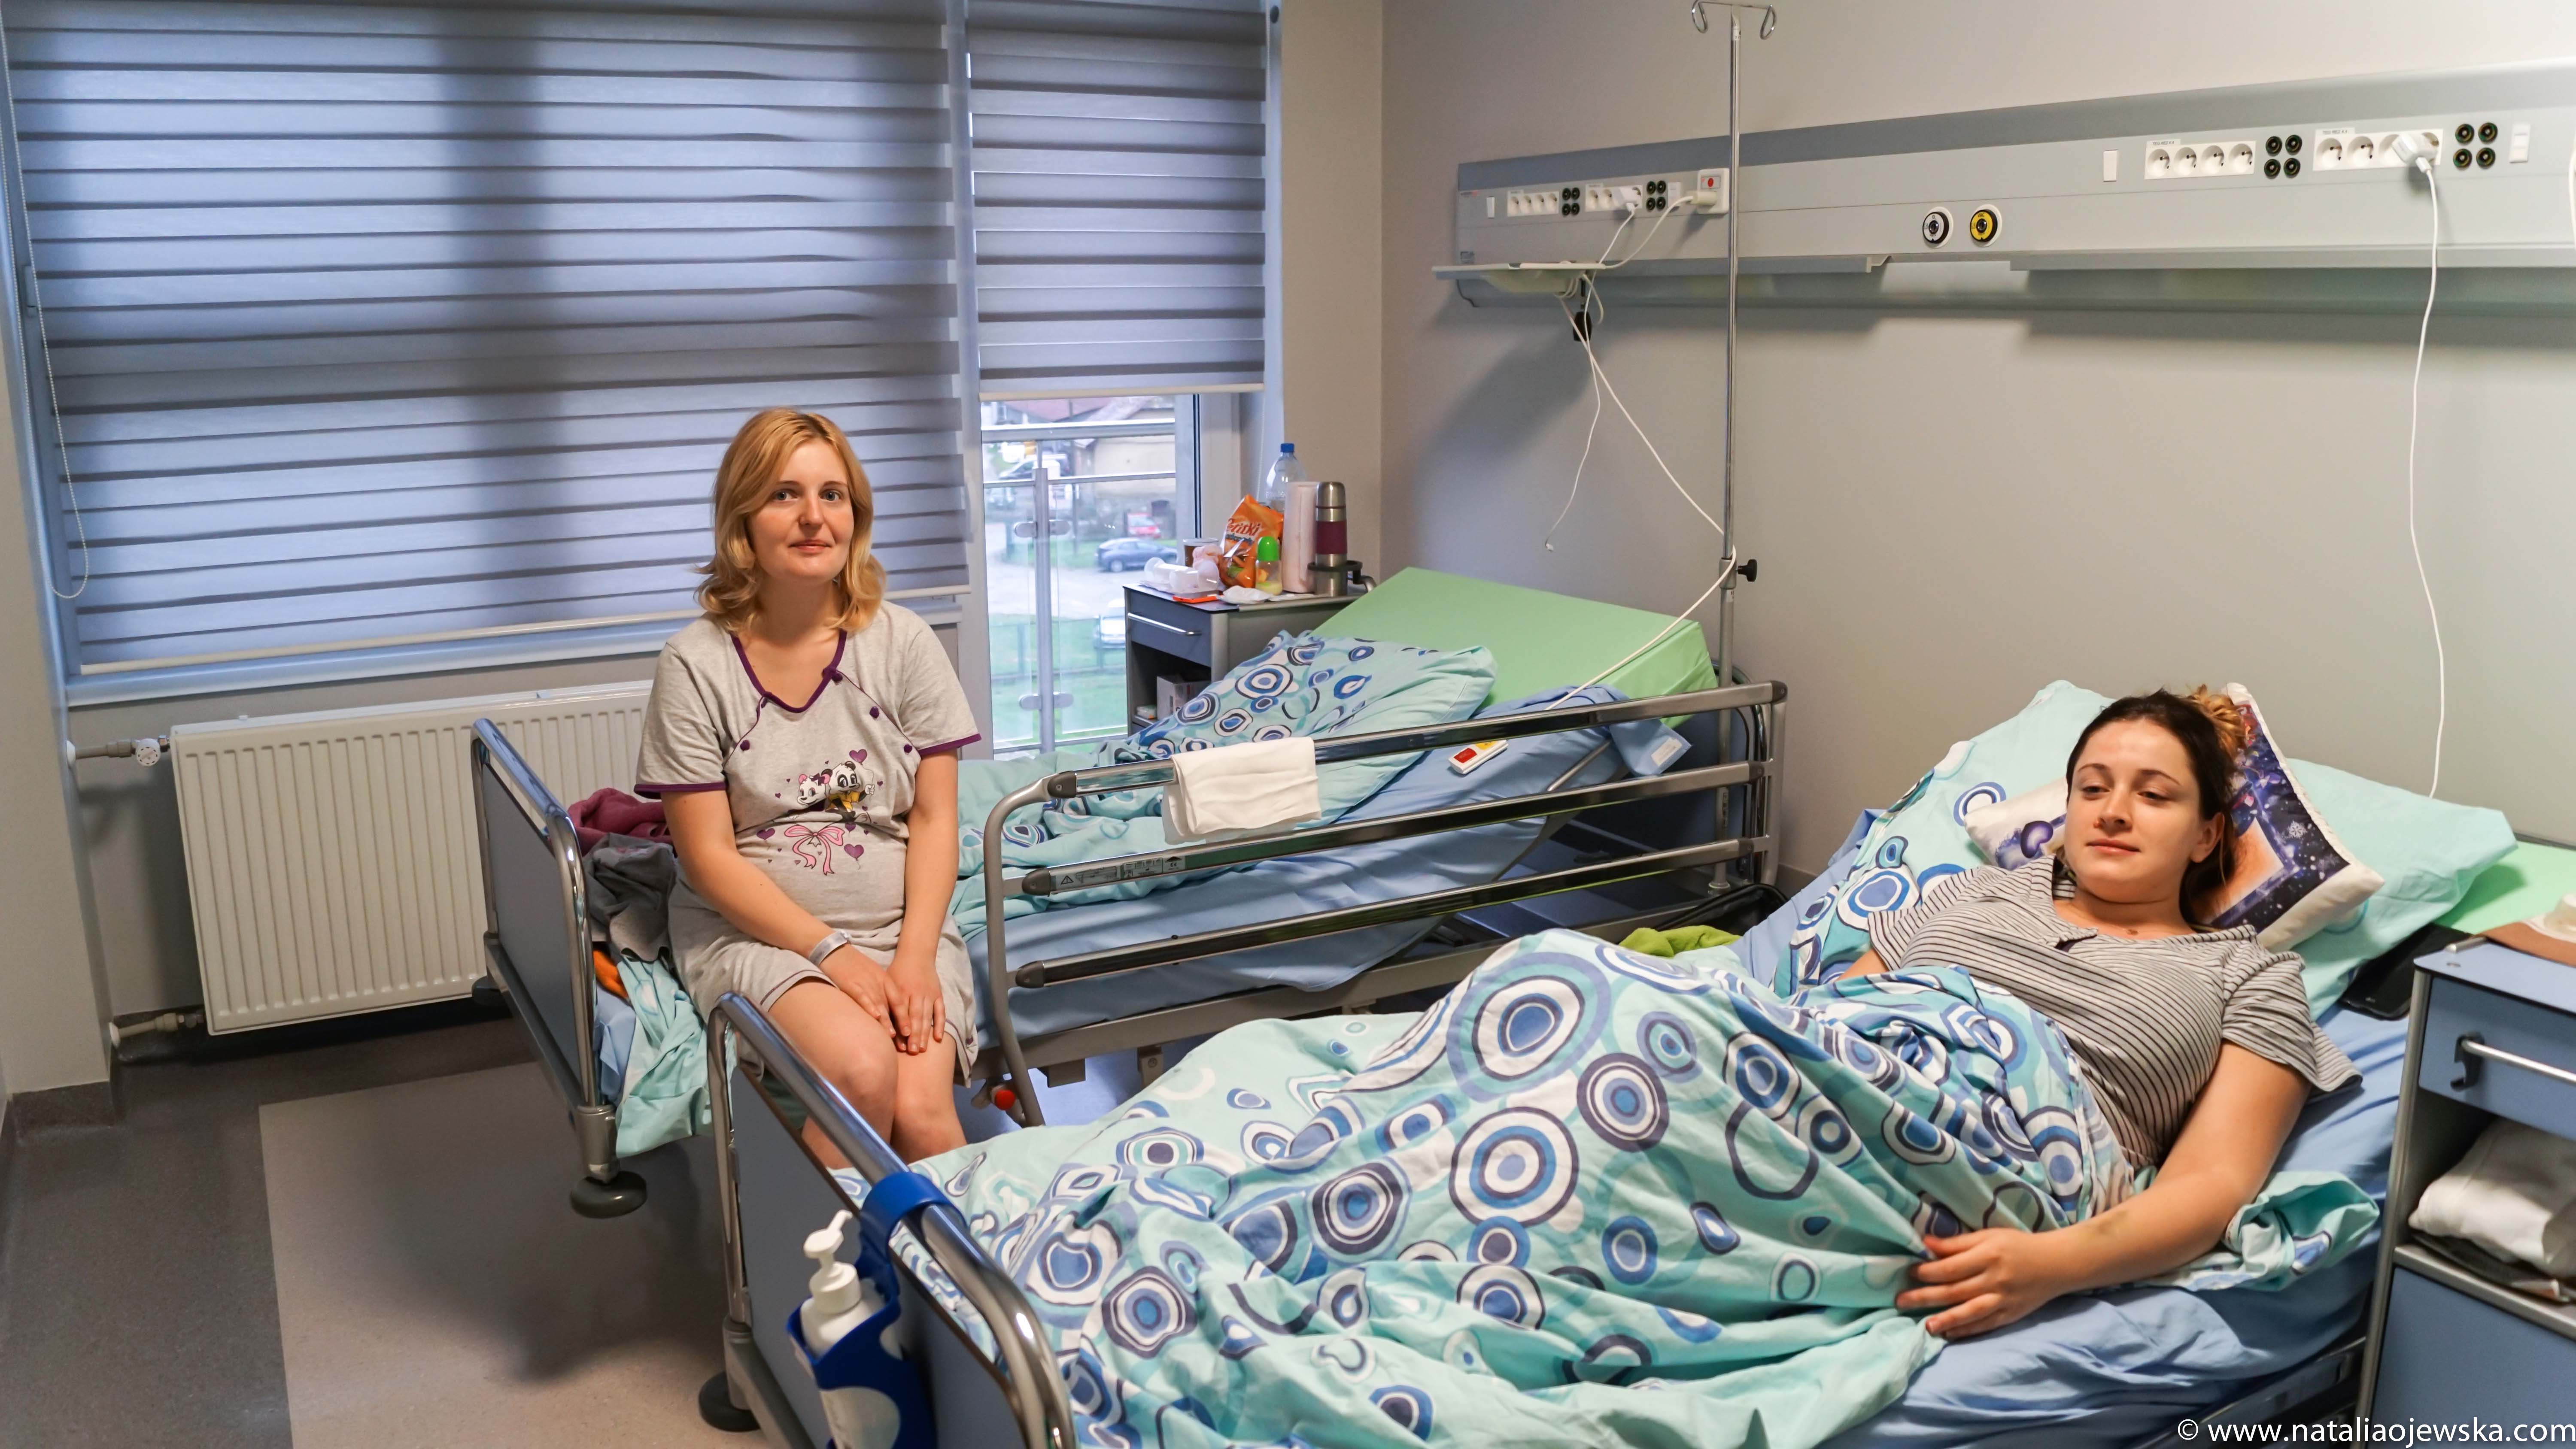 Paulina Slifierz (left) and Maja Suder (right) recover after childbirth at the Independent Public Health Care Center in Myślenice, Poland.